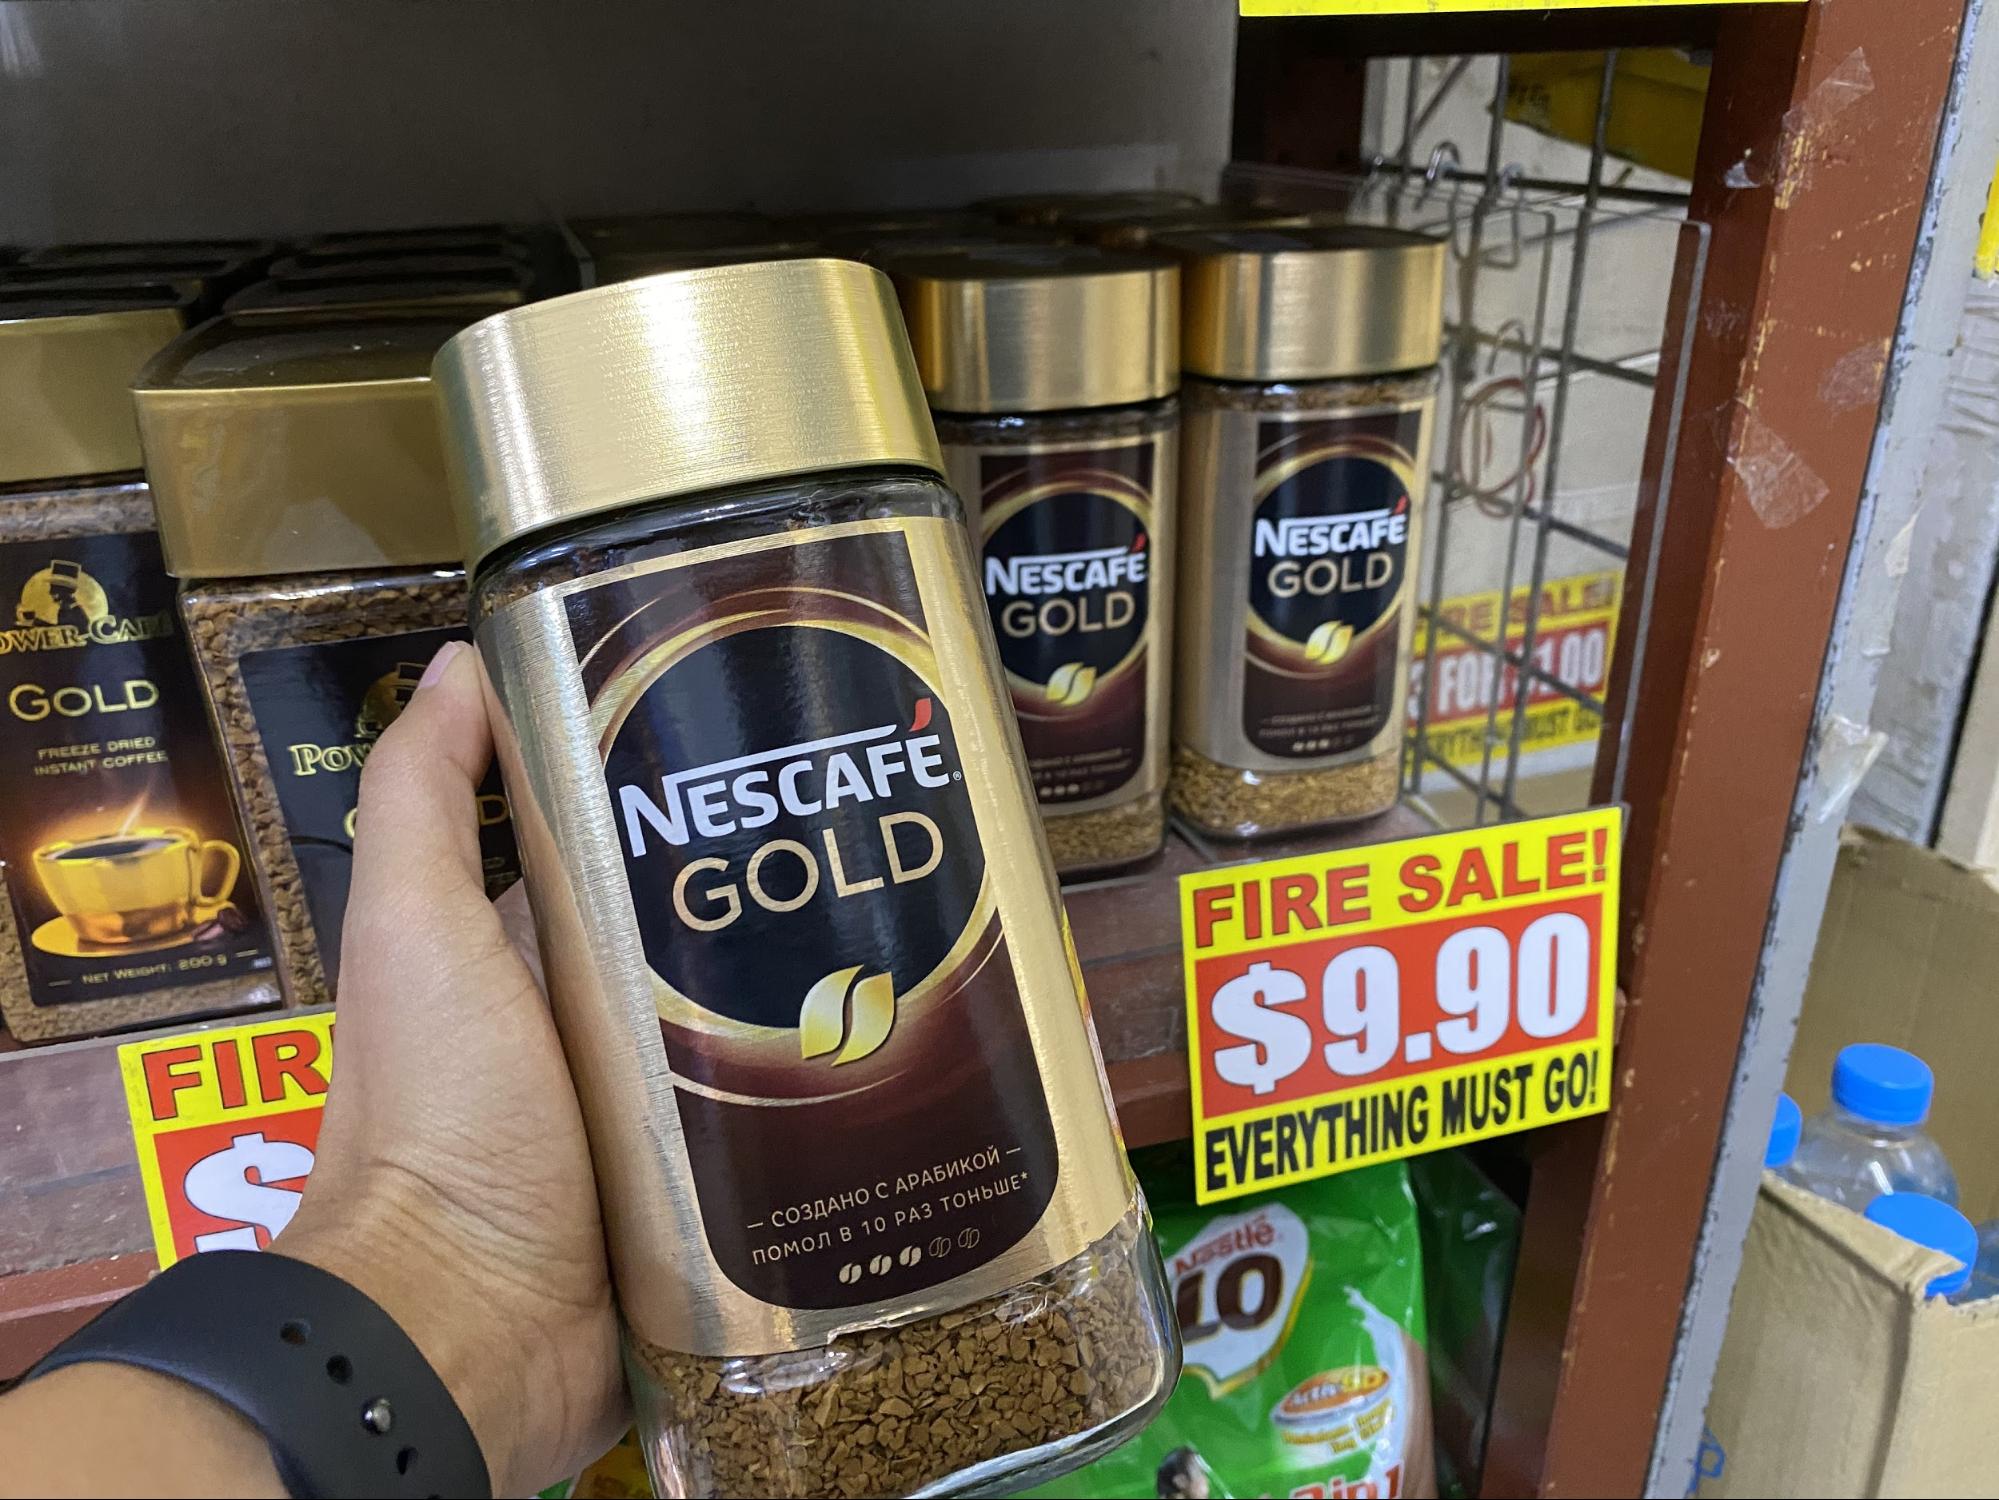 Nescafe Gold soluble coffee at the value dollar store in Singapore